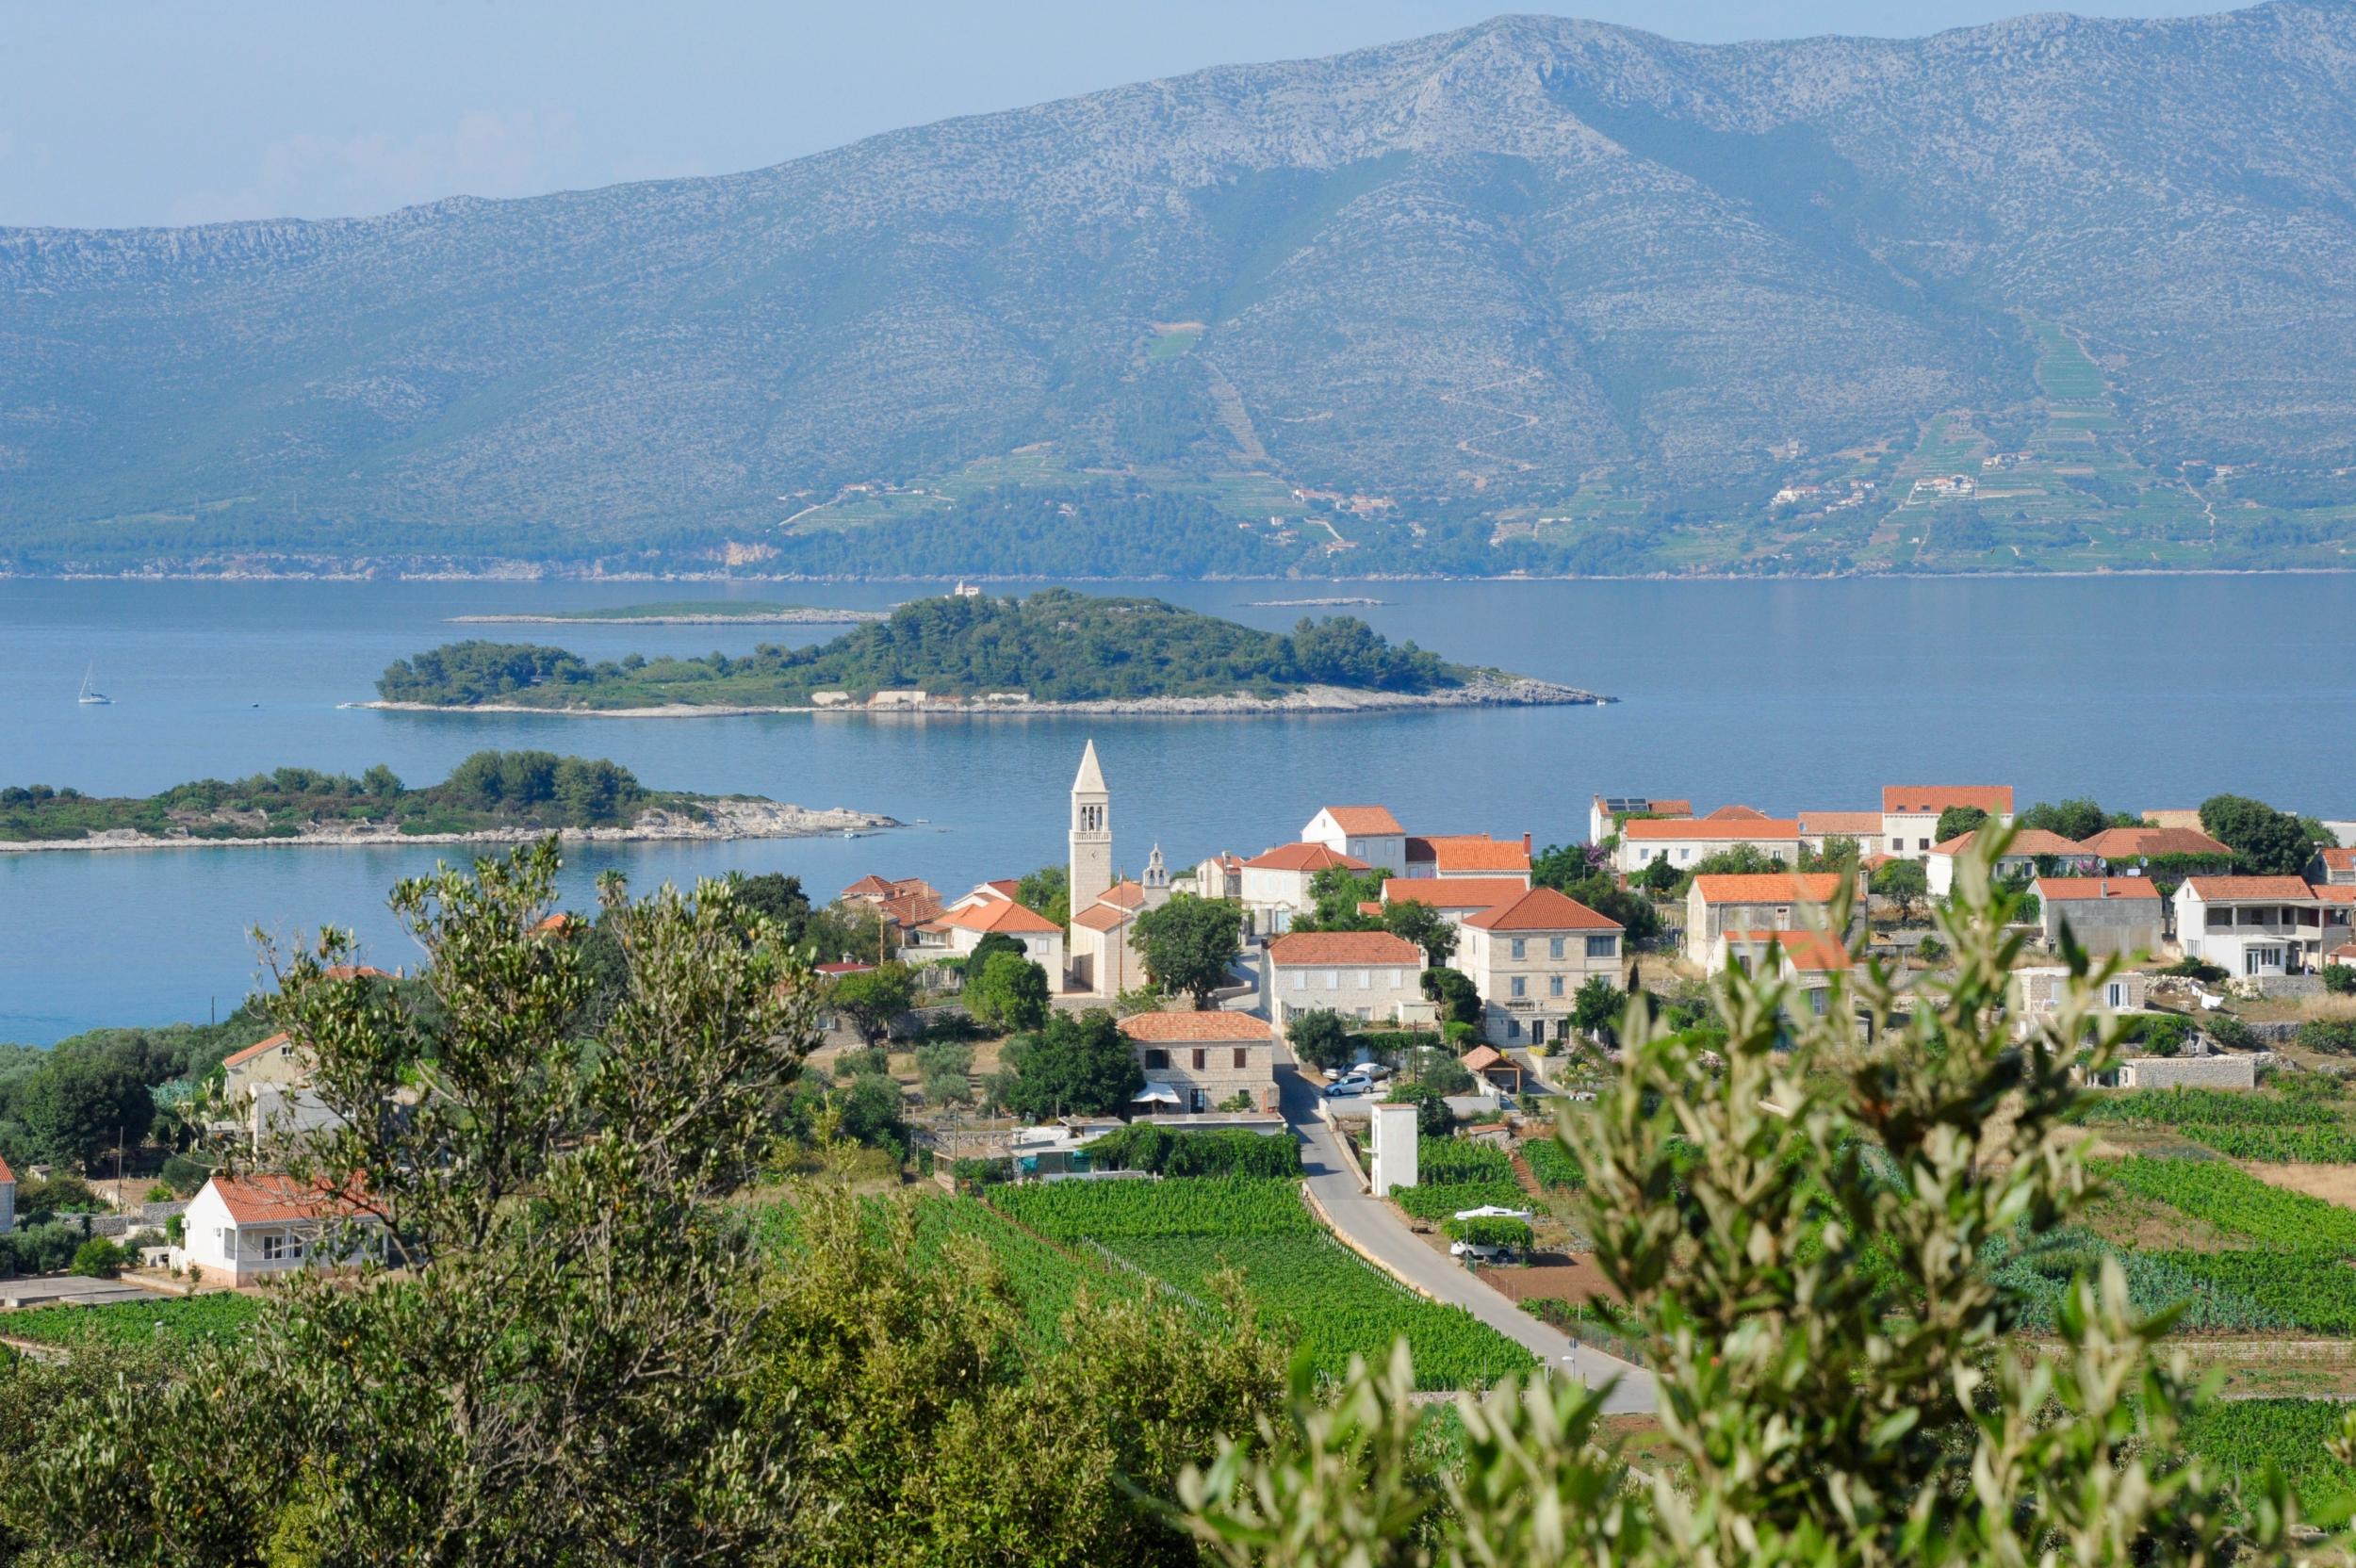 Korcula Town is like a mini Dubrovnik with plenty of wine on offer